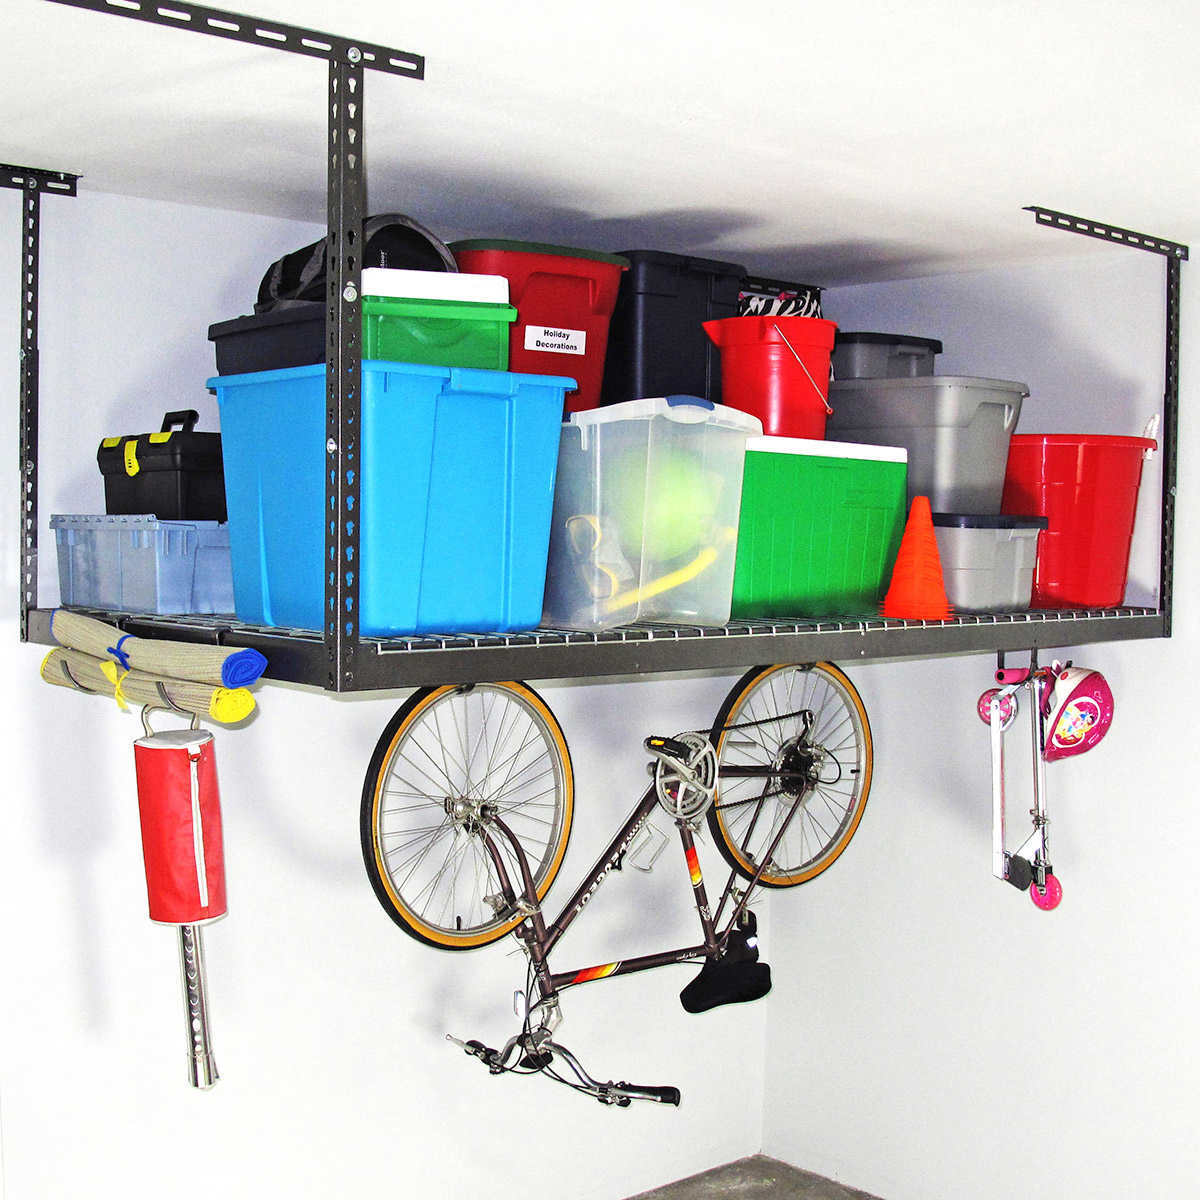 Costco SafeRacks 4 ft. x 8 ft. Overhead Garage Storage Rack and Accessories Kit